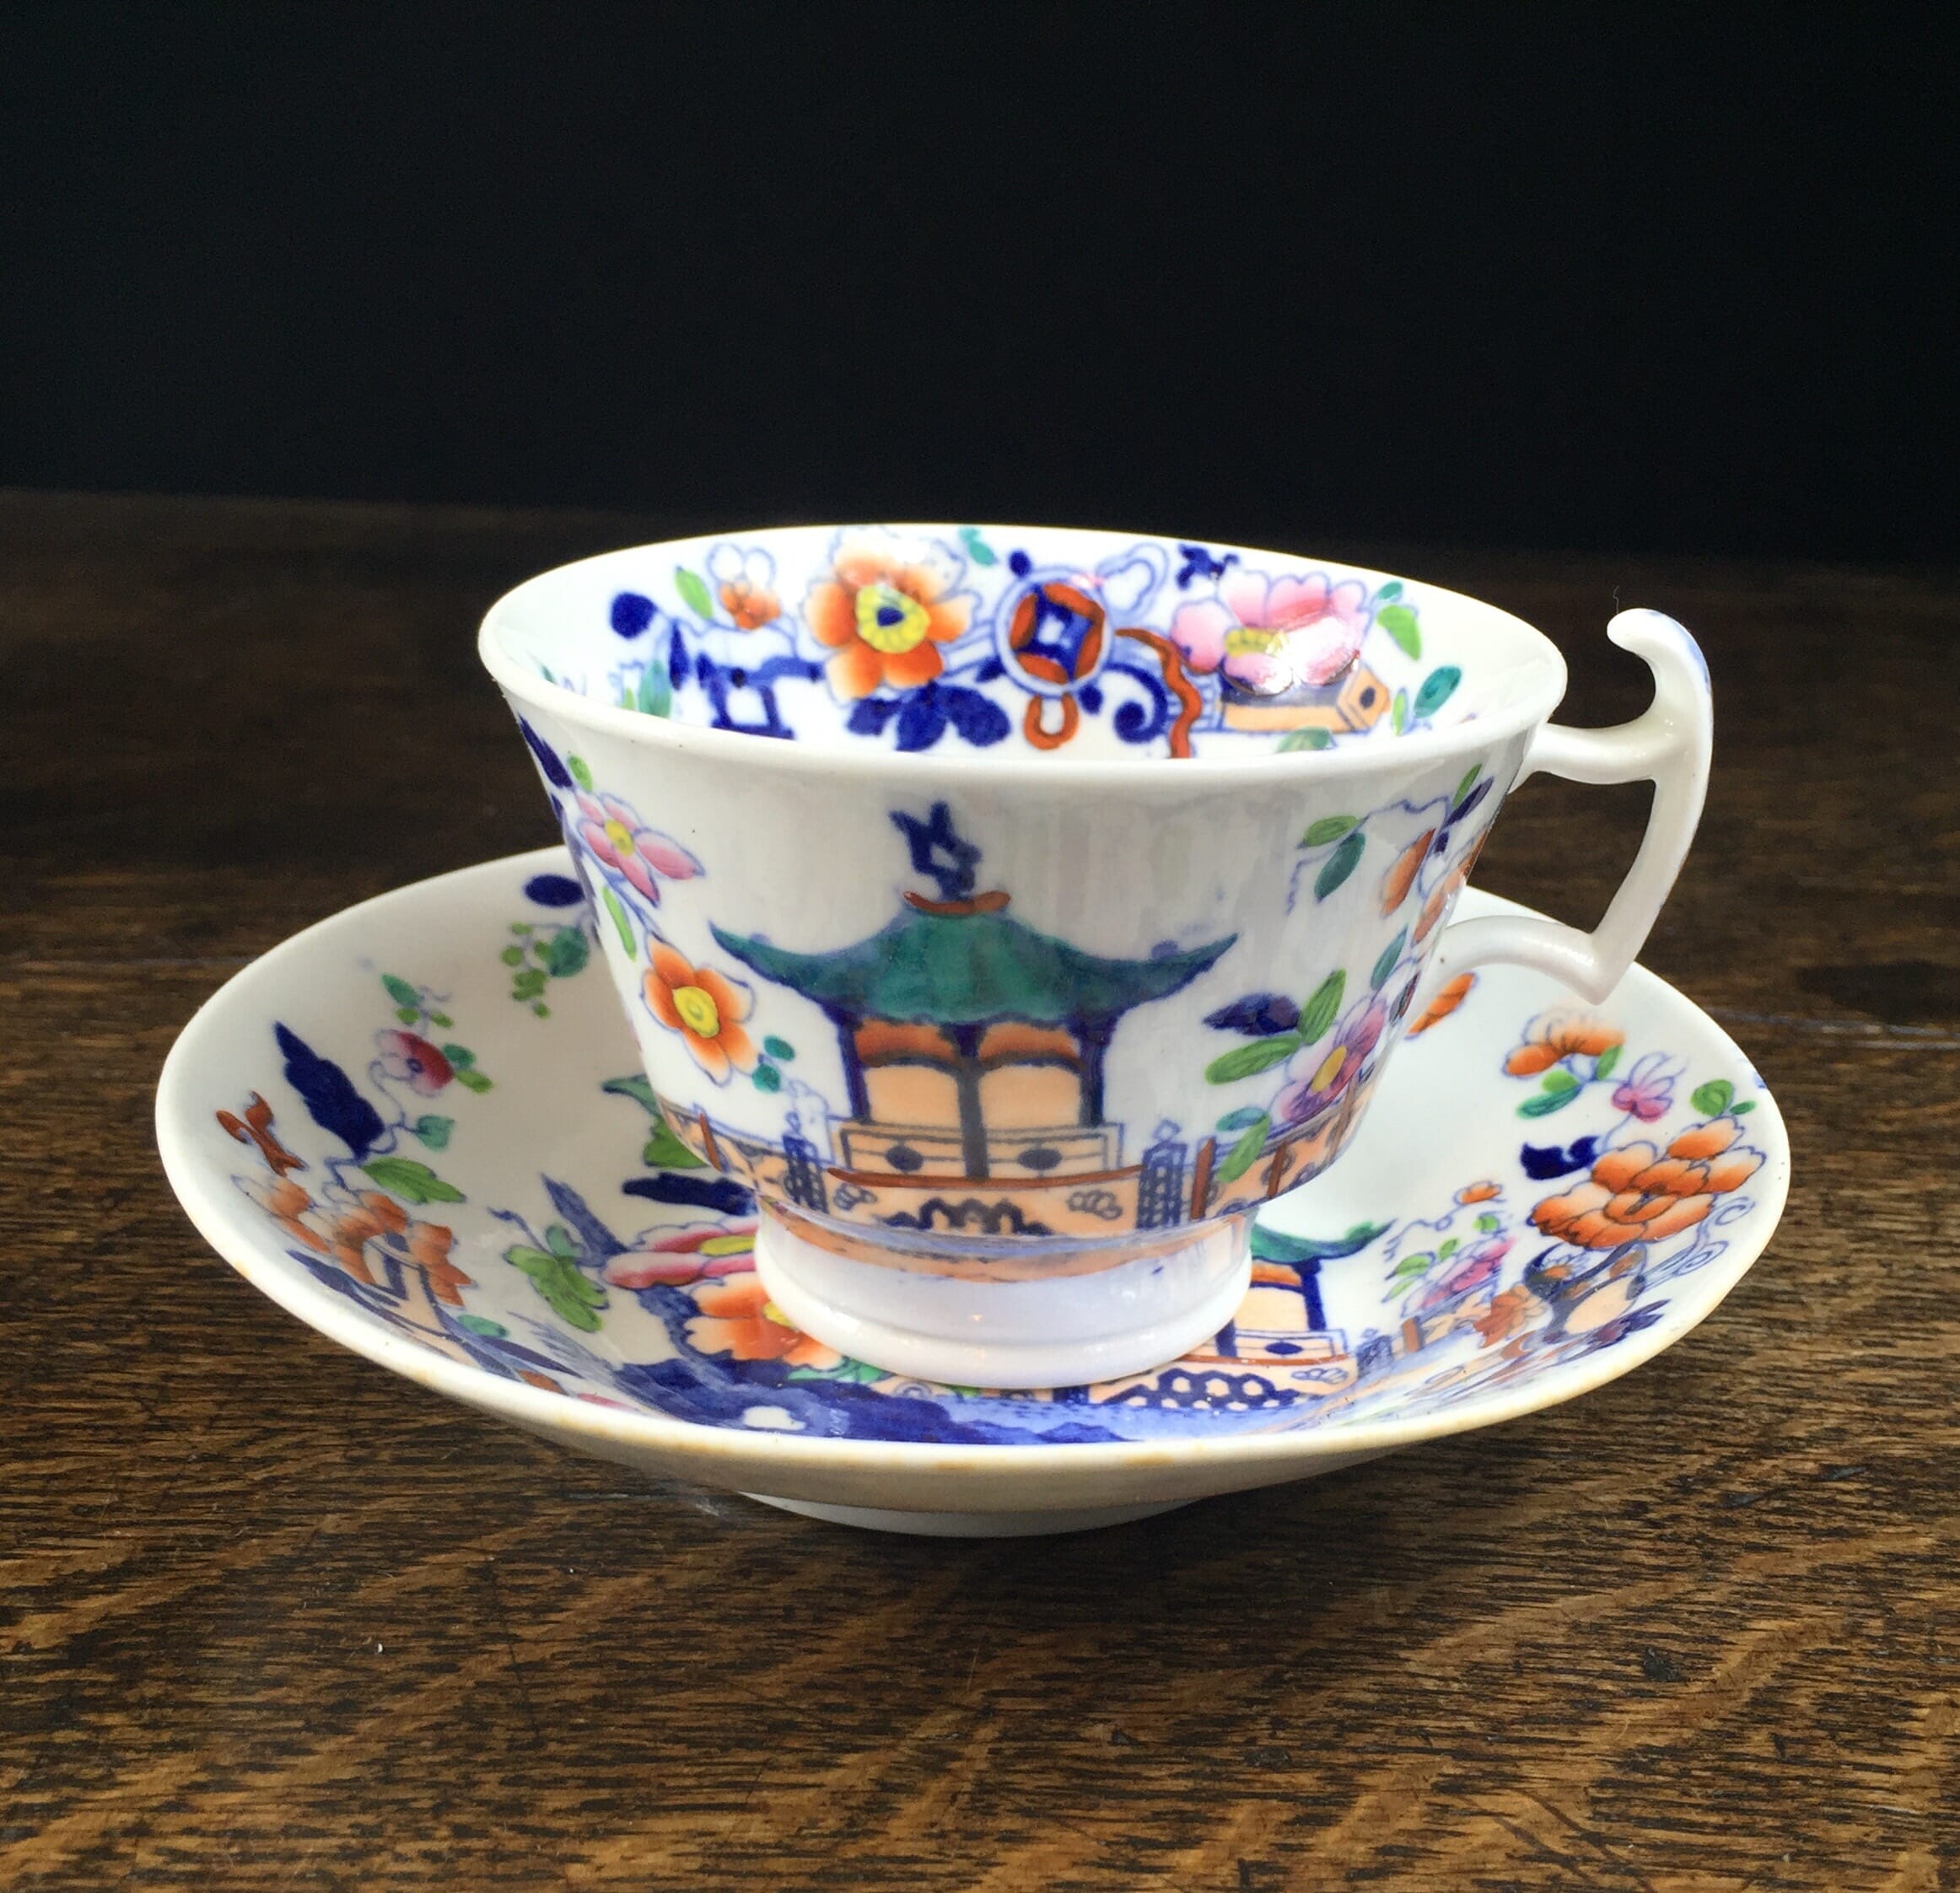 Hilditch chinoiserie clobbered cup & saucer, C. 1825 -0